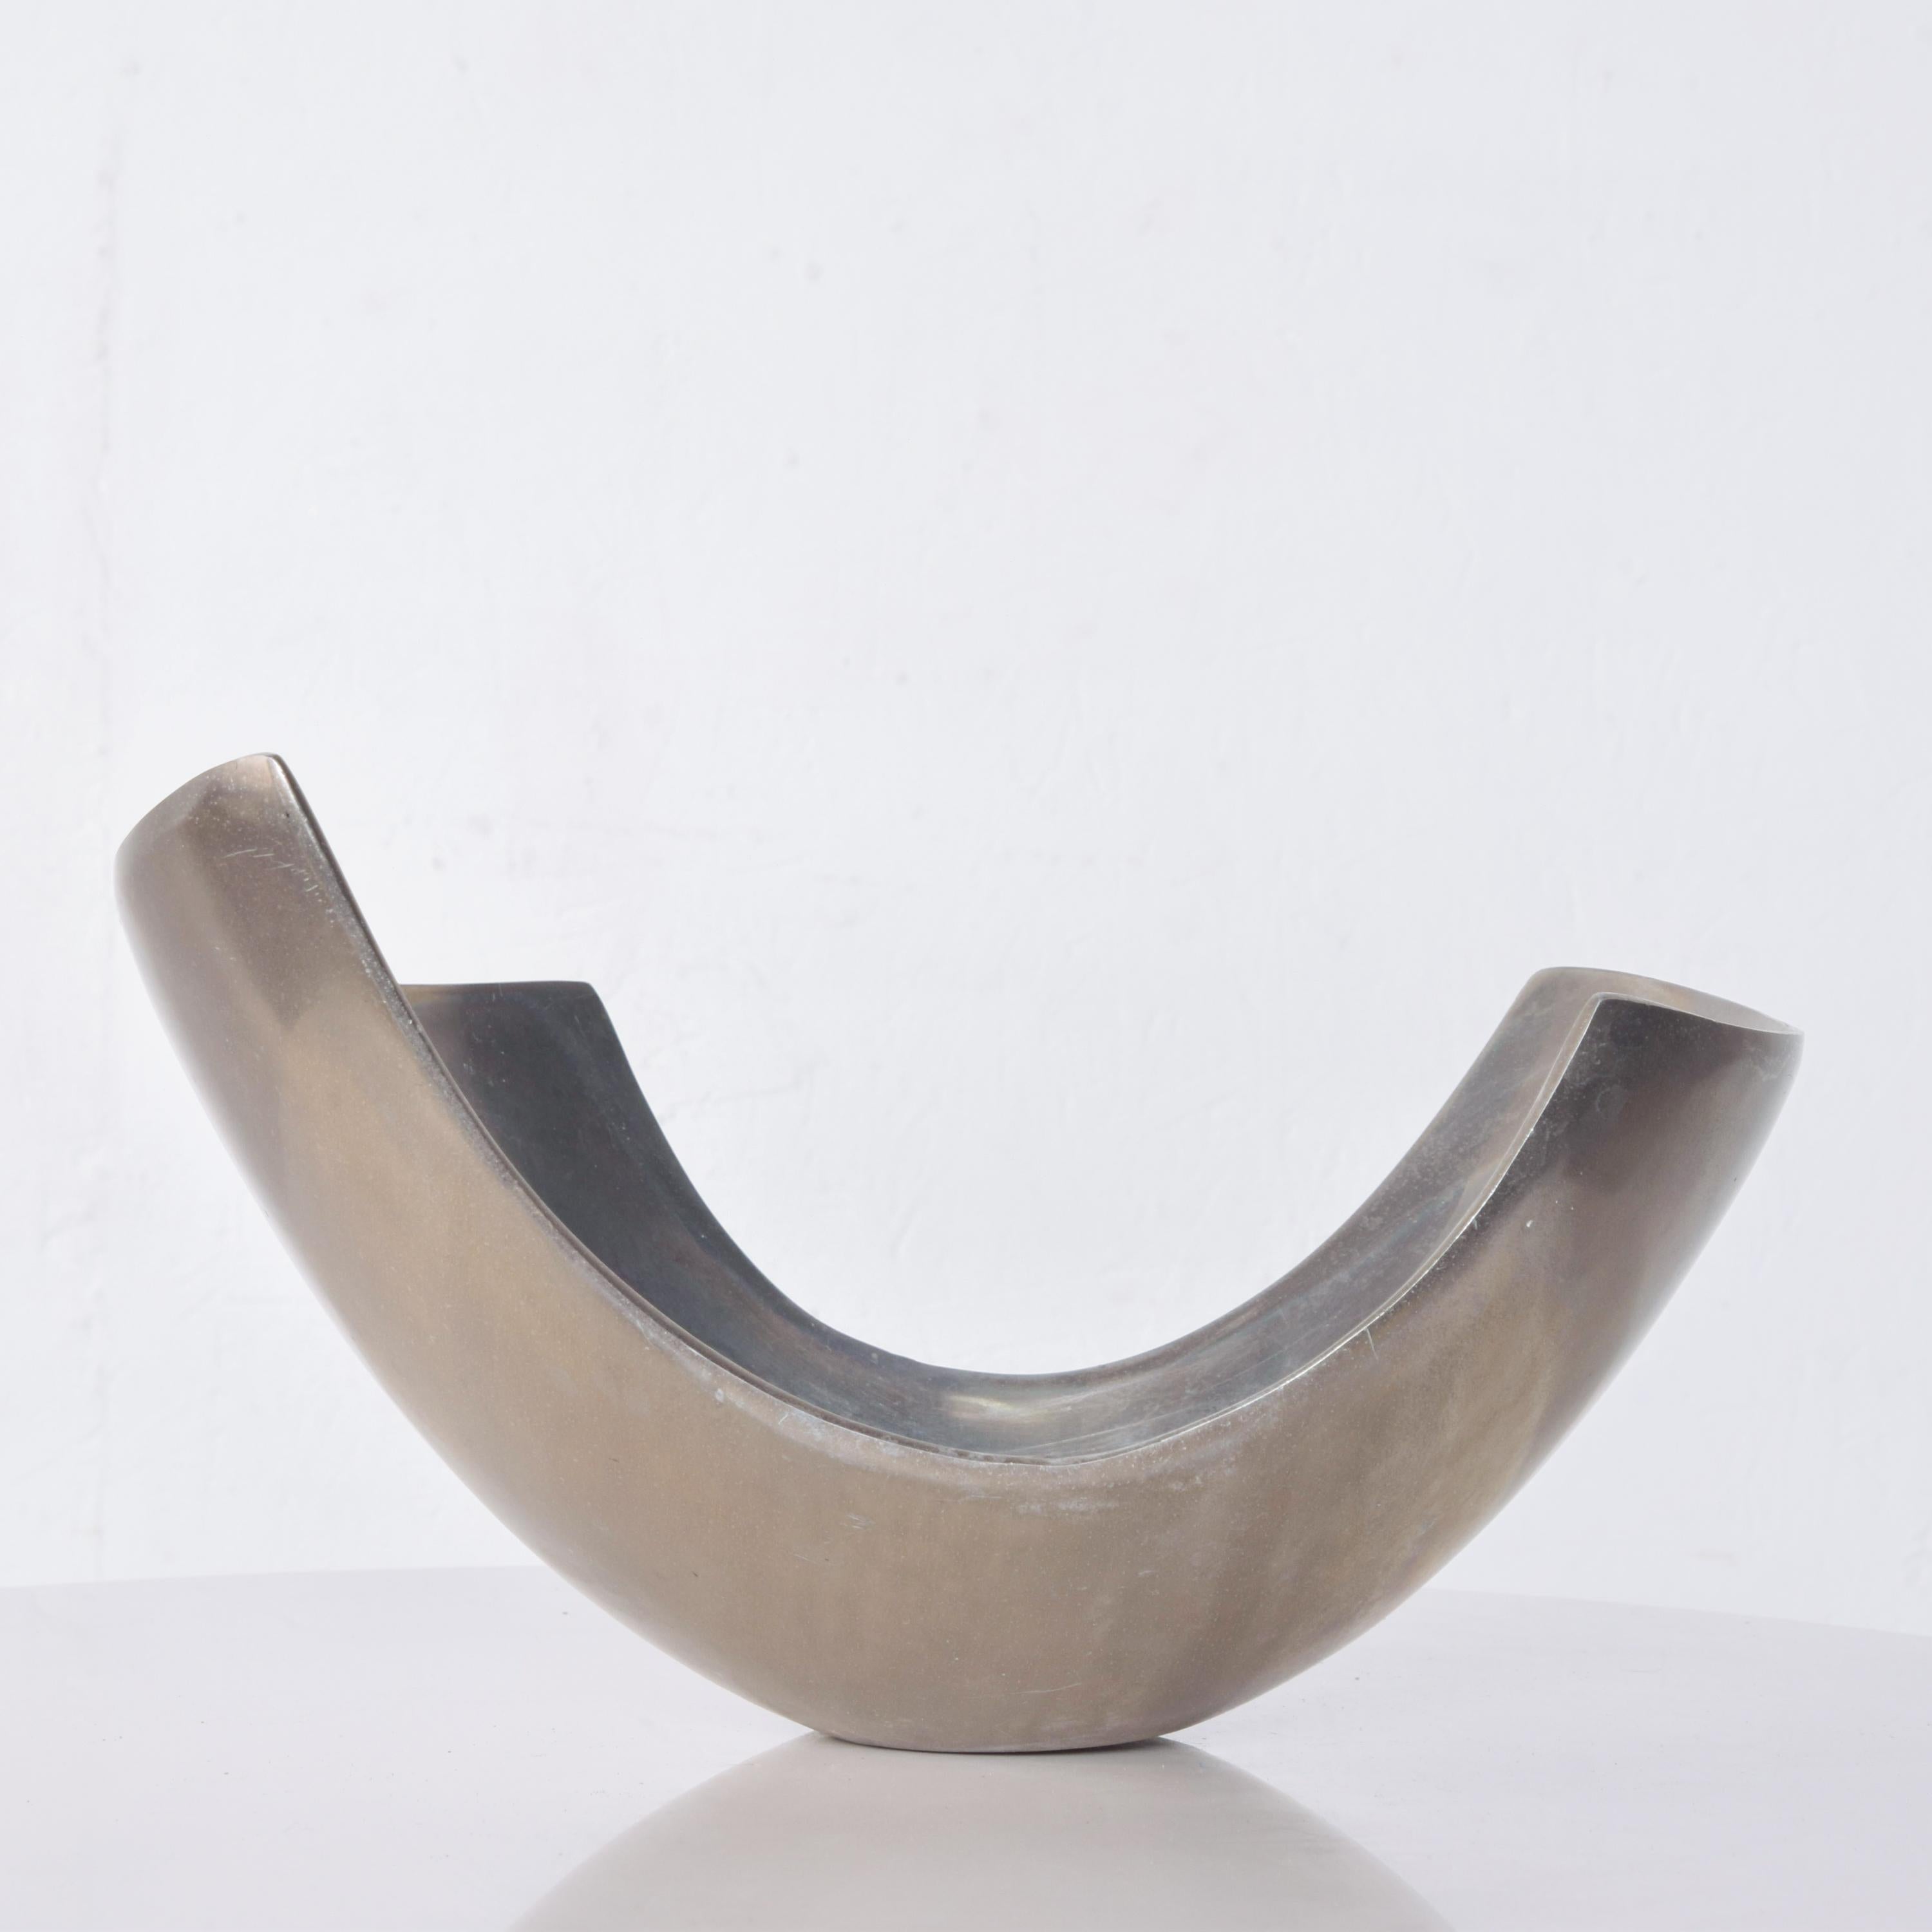 For your consideration, a modern sculptural aluminum bowl. No label or signature present from the maker, circa 1980s. 

Original vintage unrestored condition. Vintage patina present. 

Expect signs of vintage wear. 

Unique design with amazing